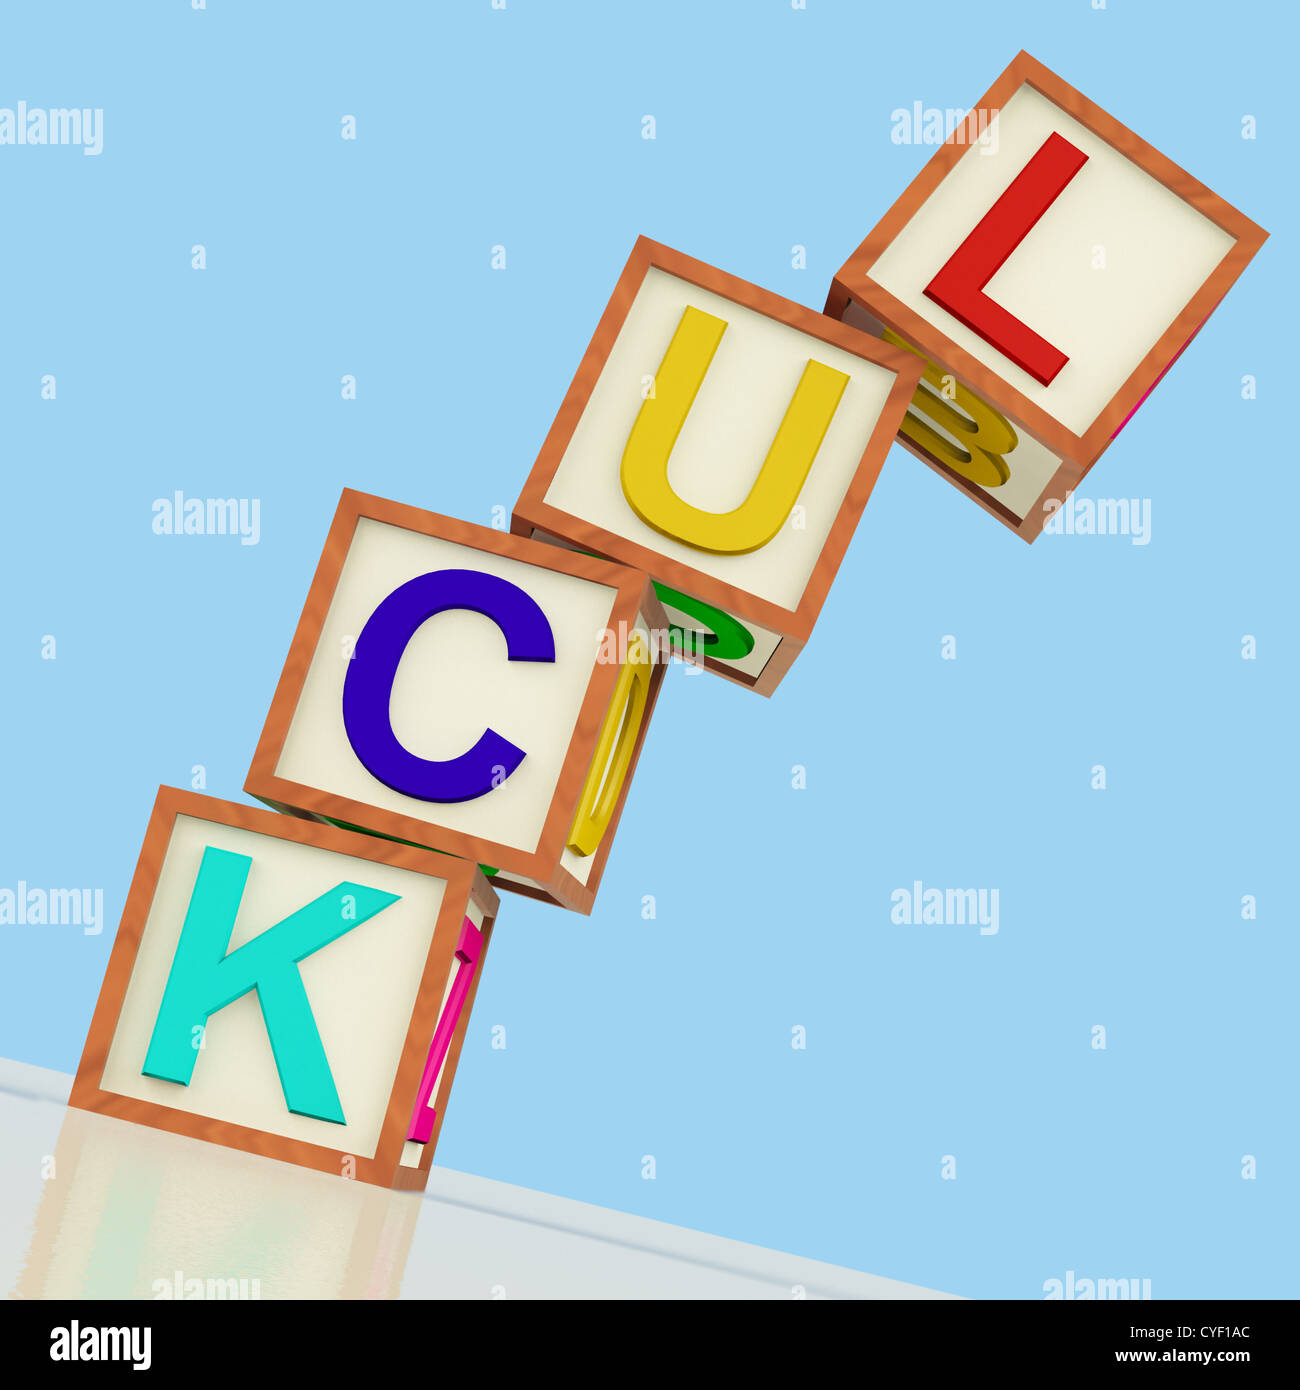 Luck Blocks Showing Chance Gambling And Risks Stock Photo